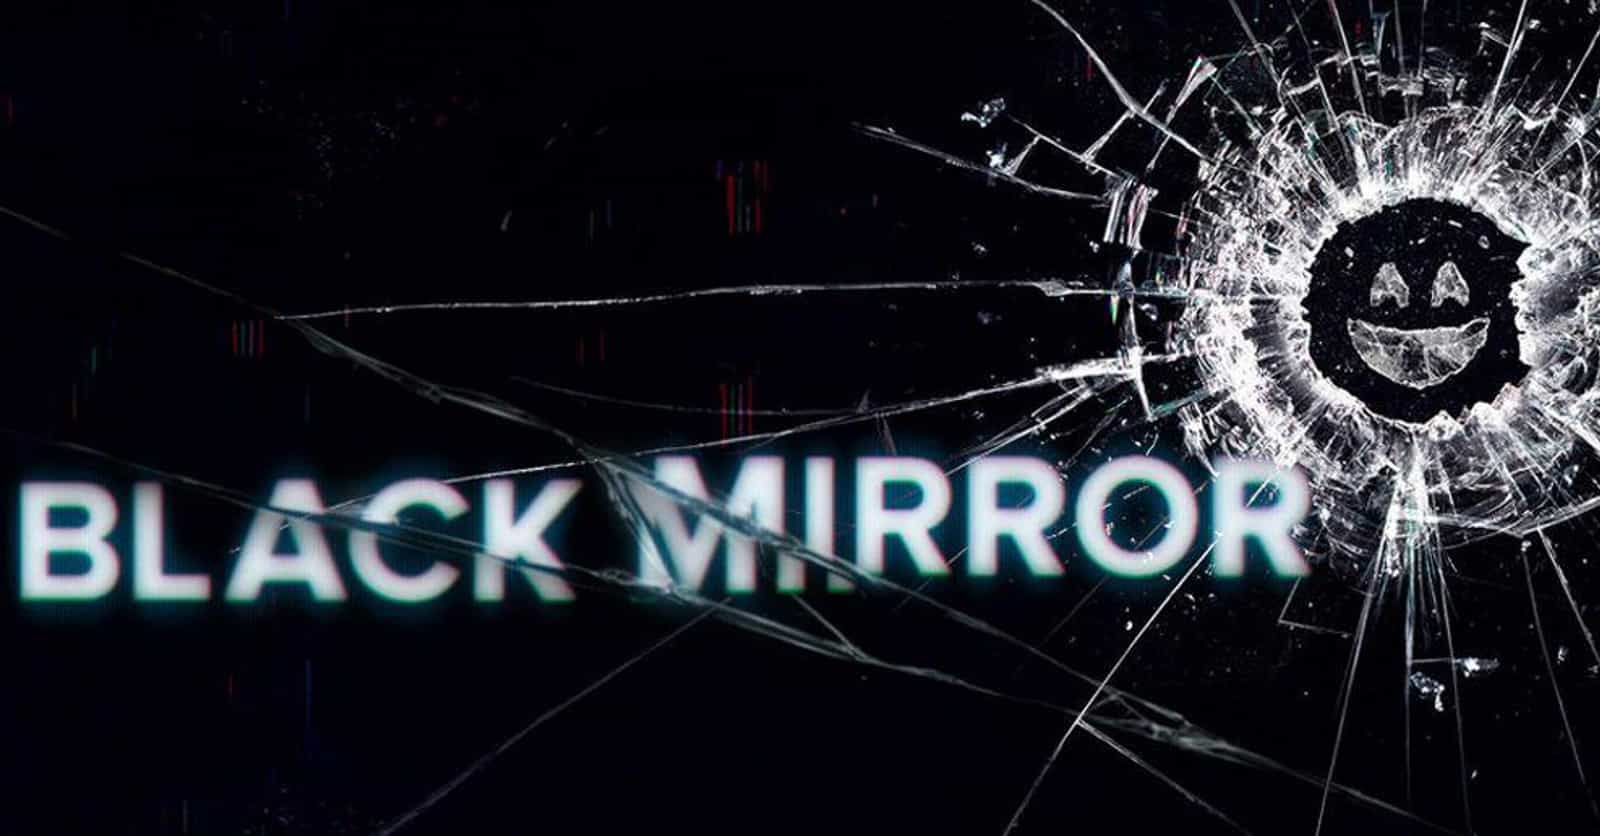 Wildly Convincing Black Mirror Fan Theories That Somehow Make The Show Even Crazier